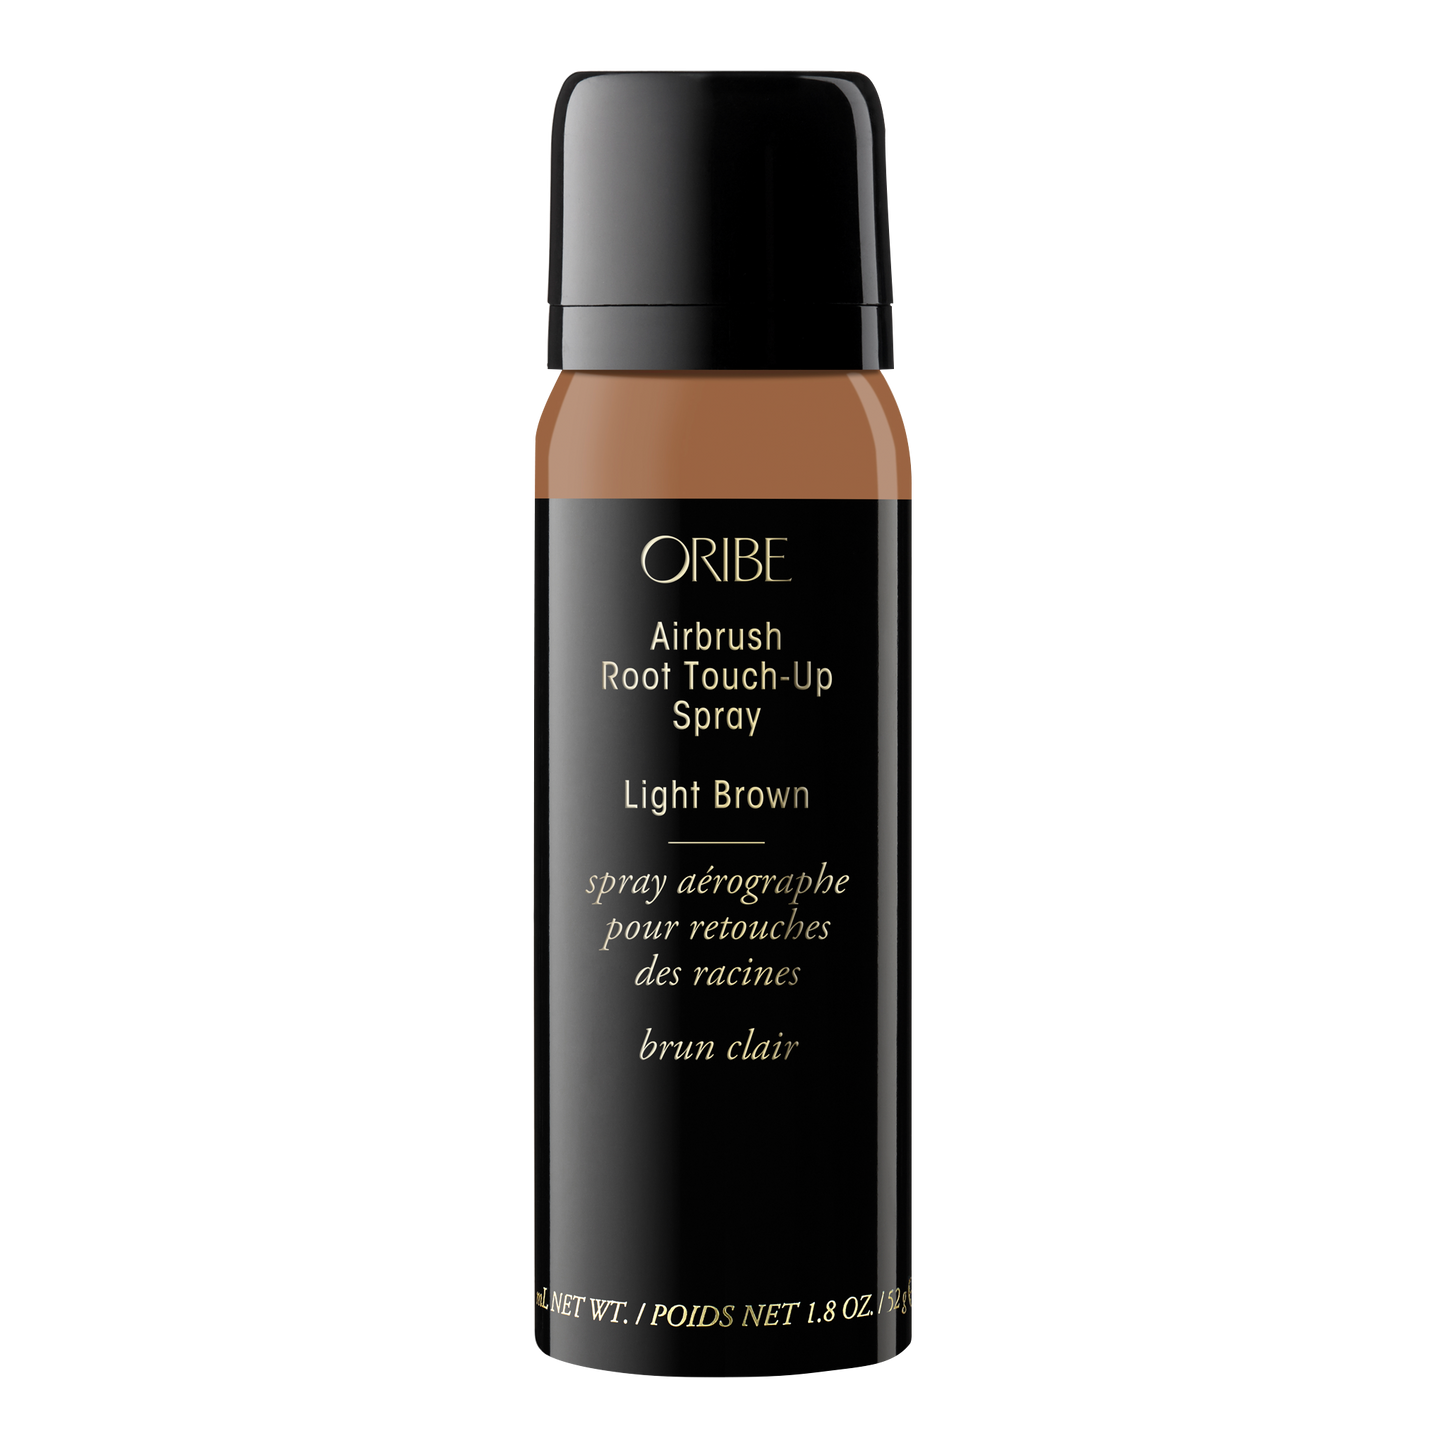 Airbrush Root Touch-Up Spray - Light Brown 75mL